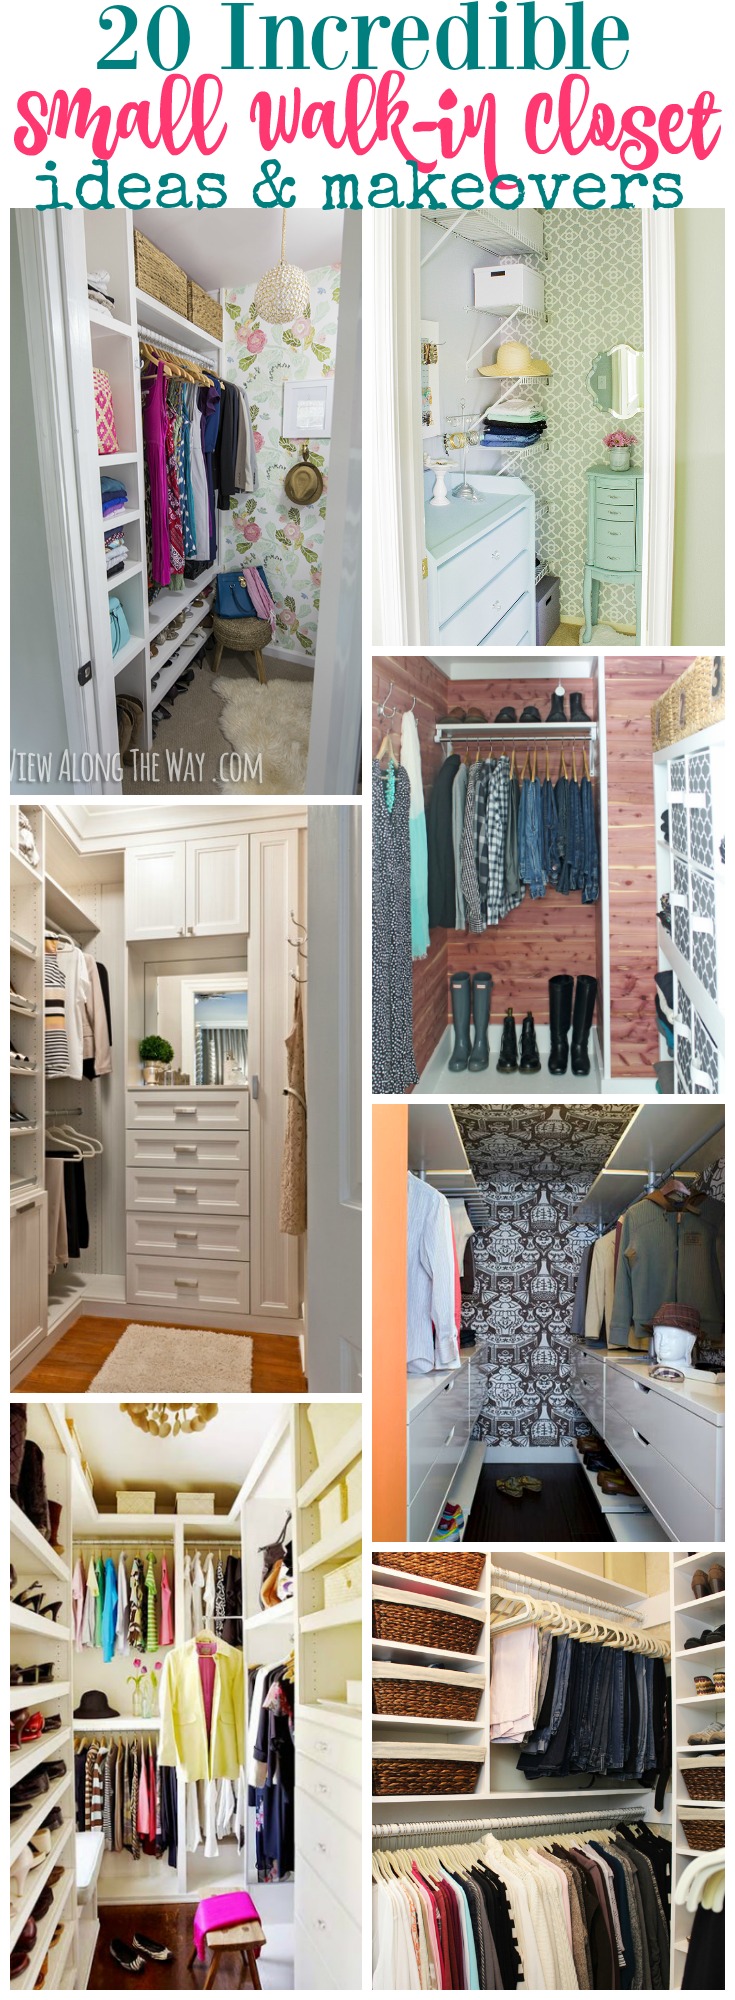 https://www.thehappyhousie.com/wp-content/uploads/2016/10/Get-inspired-to-whip-your-closet-into-shape-with-these-20-incredible-small-walk-in-closet-ideas-and-makeovers.jpg